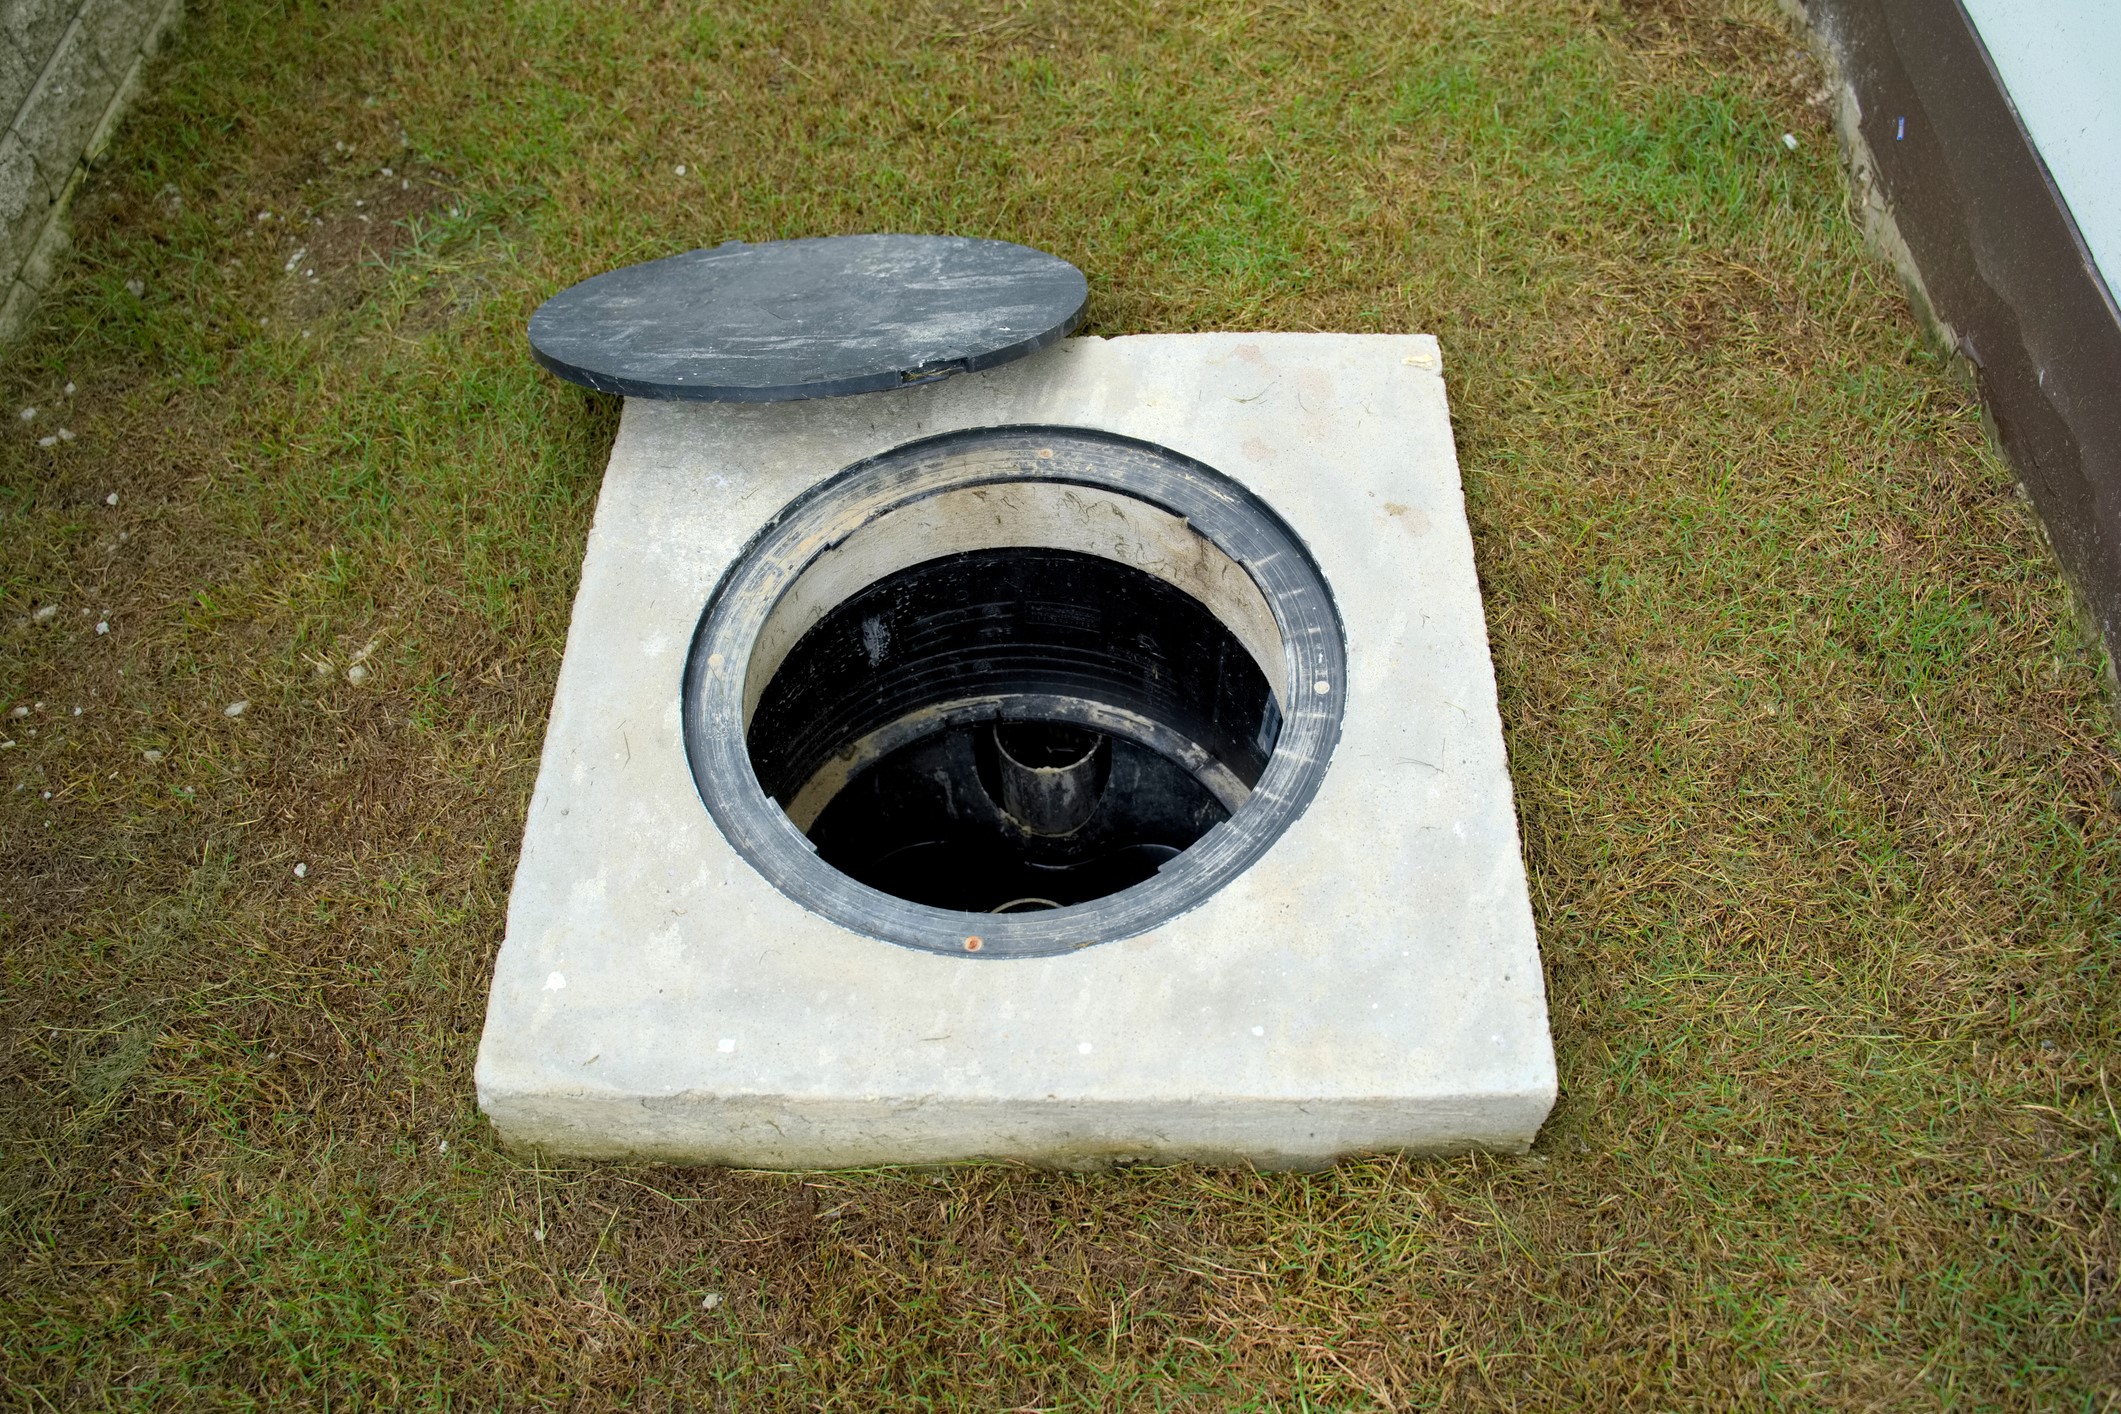 Know the Dangers of Underground Grease Traps